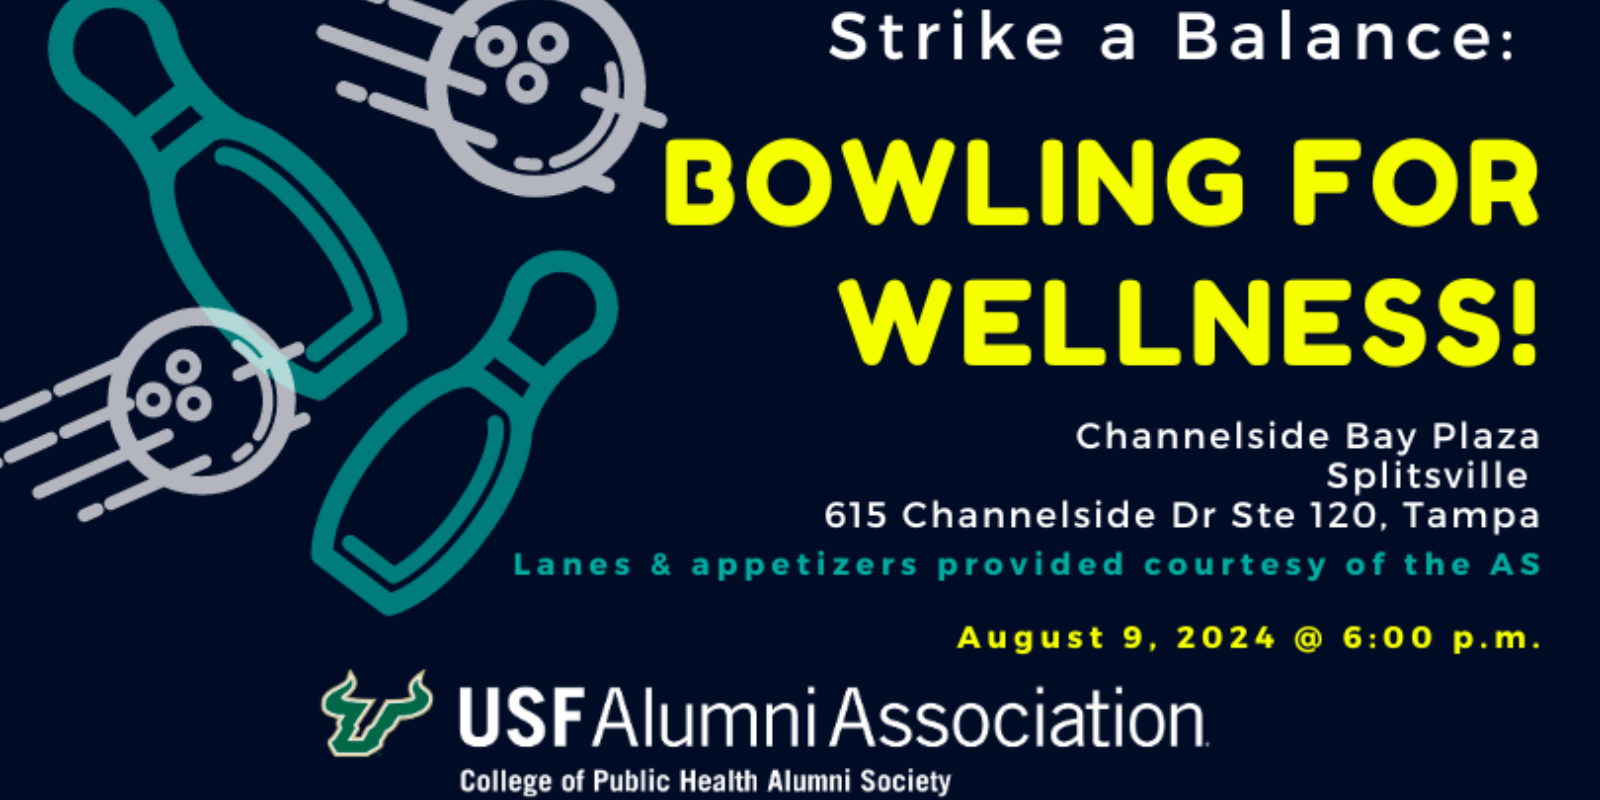 Bowling for Wellness!